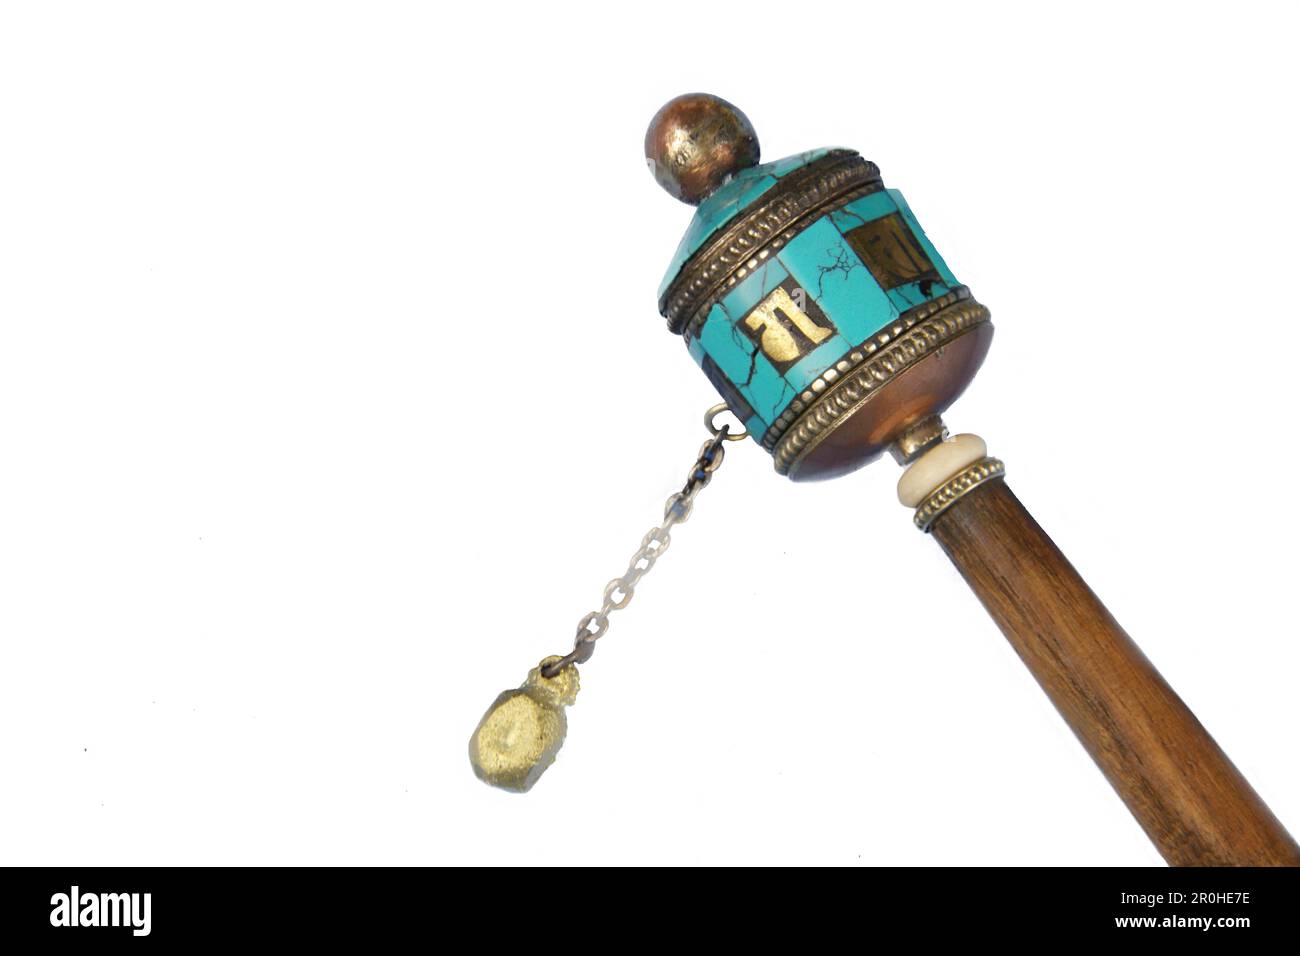 Prayer hand wheel in turquoise color, cutout, China, Tibet Stock Photo